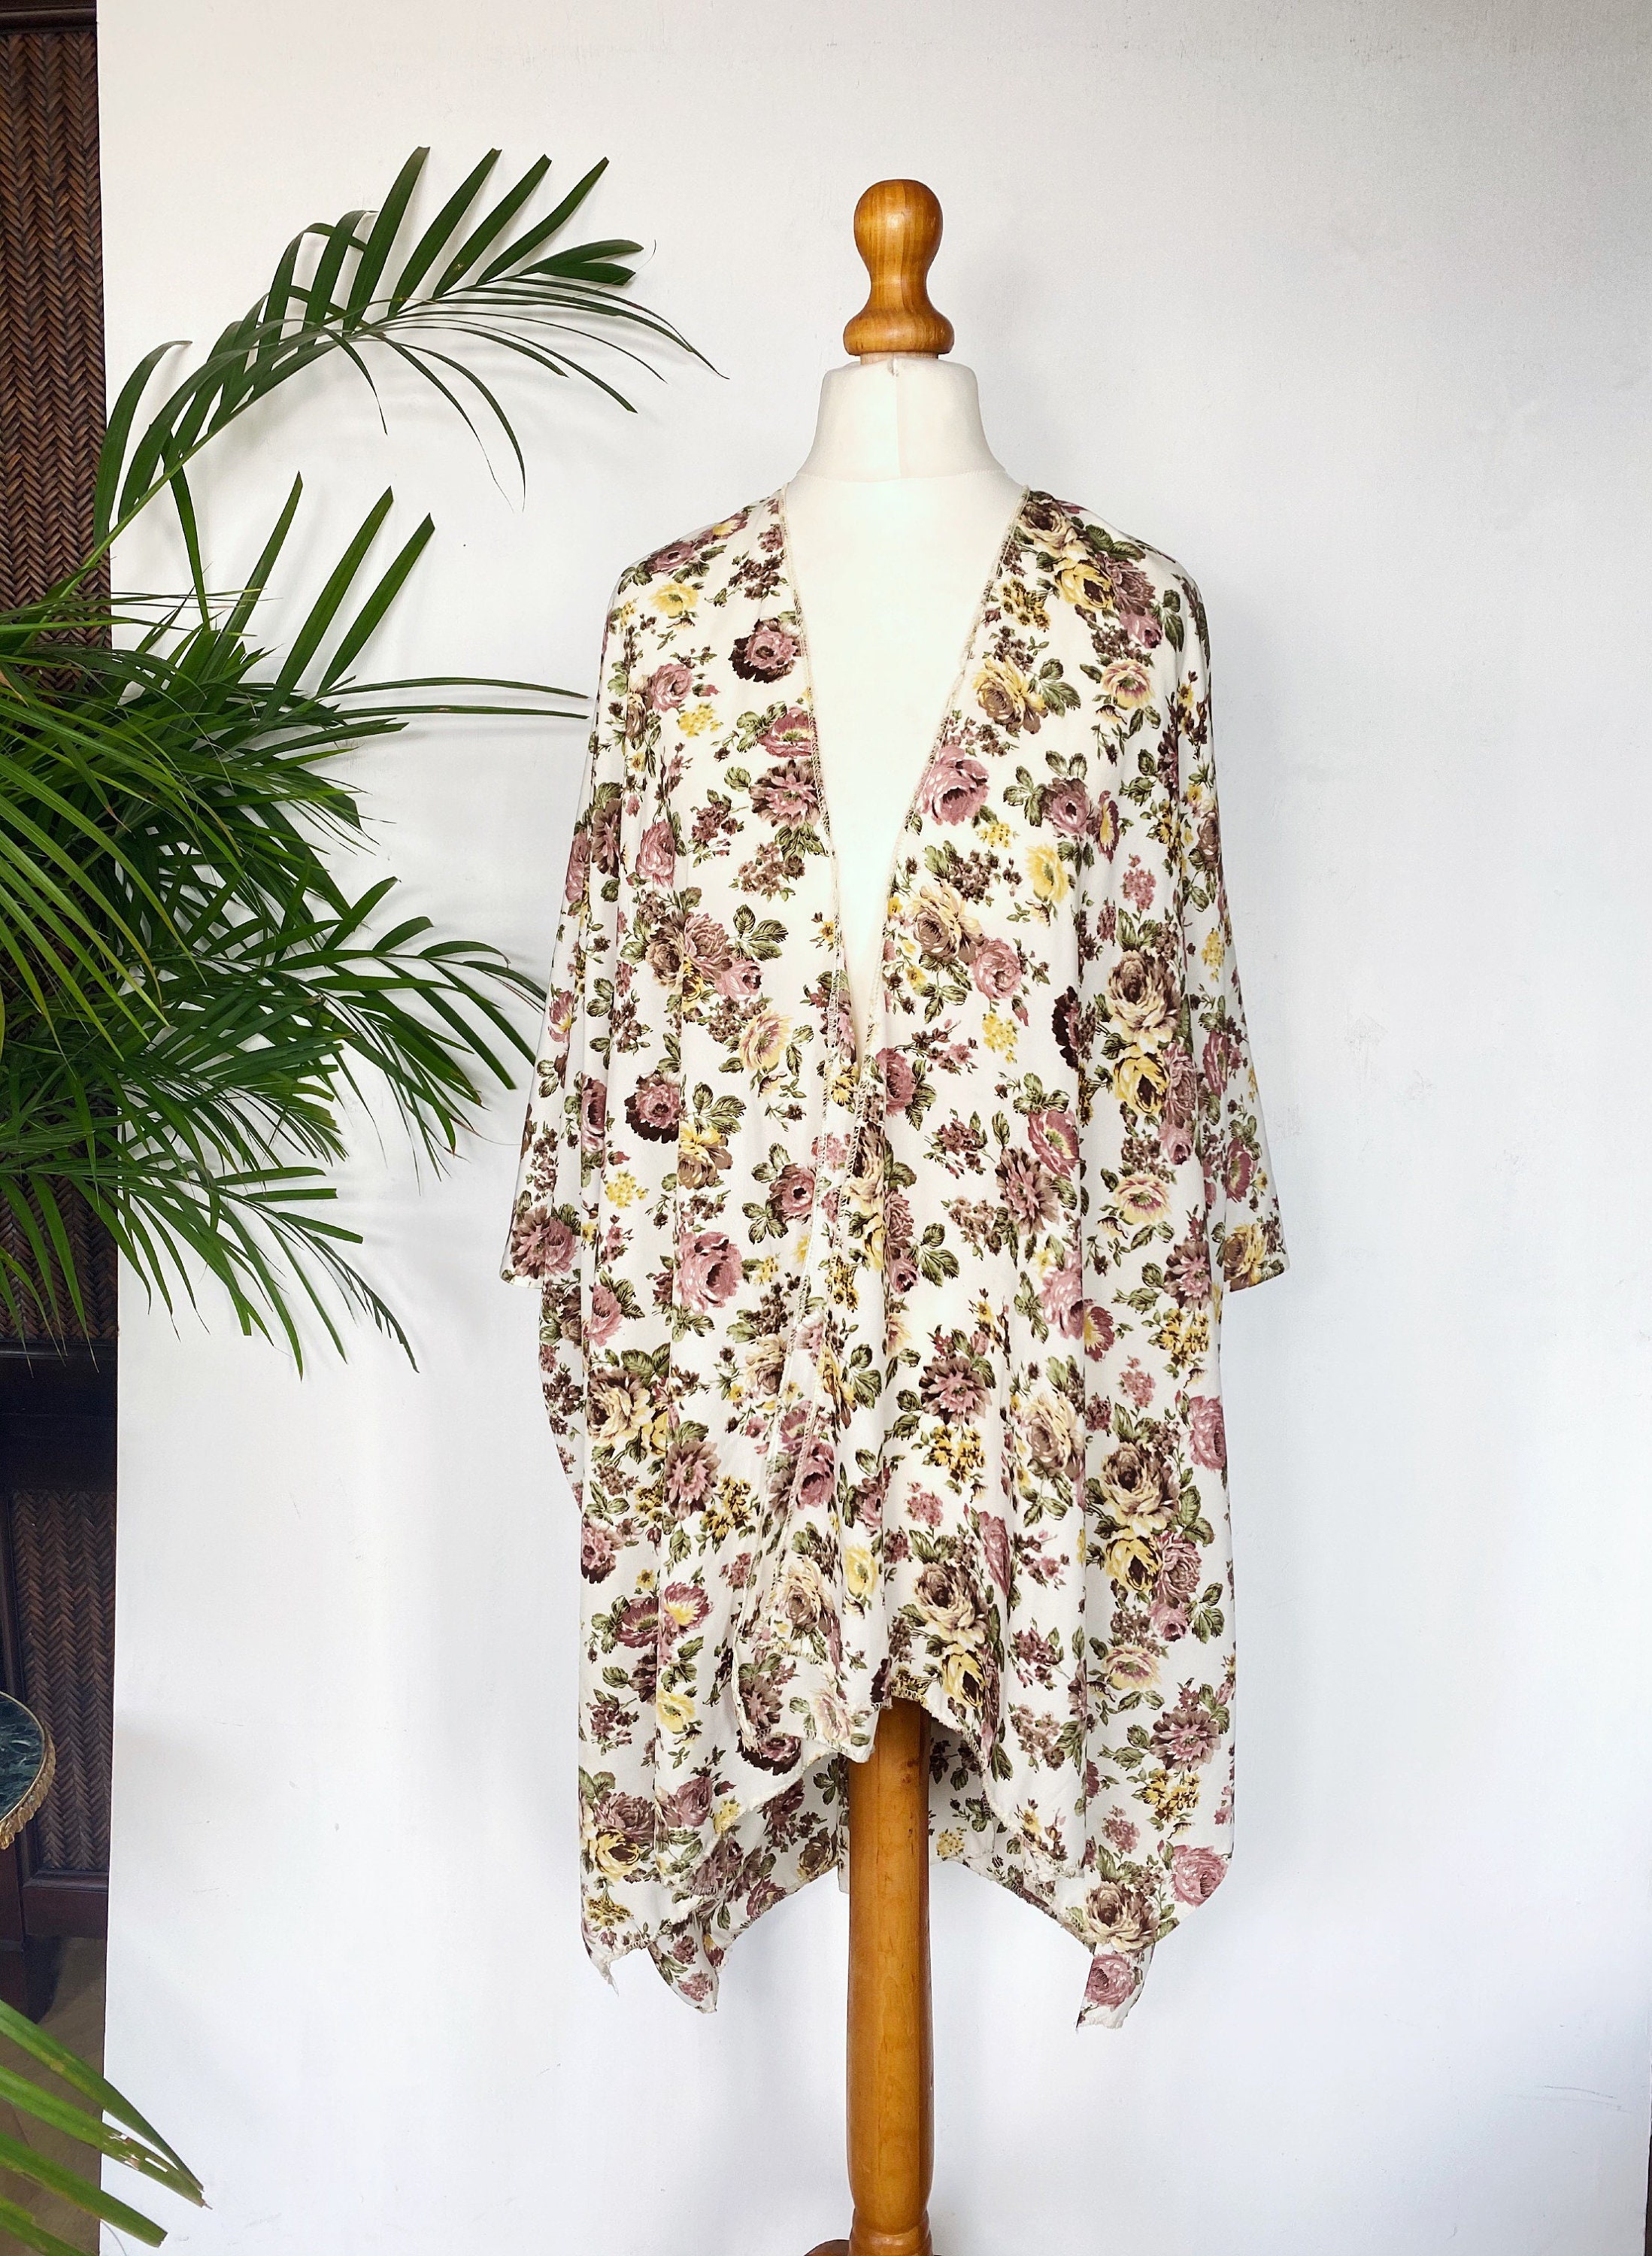 Lightweight Spring Summer Jacket Cover Over Handmade Floral Kimono Robe Free Size Vintage 50s Style Floral Festival Boho Aesthetic